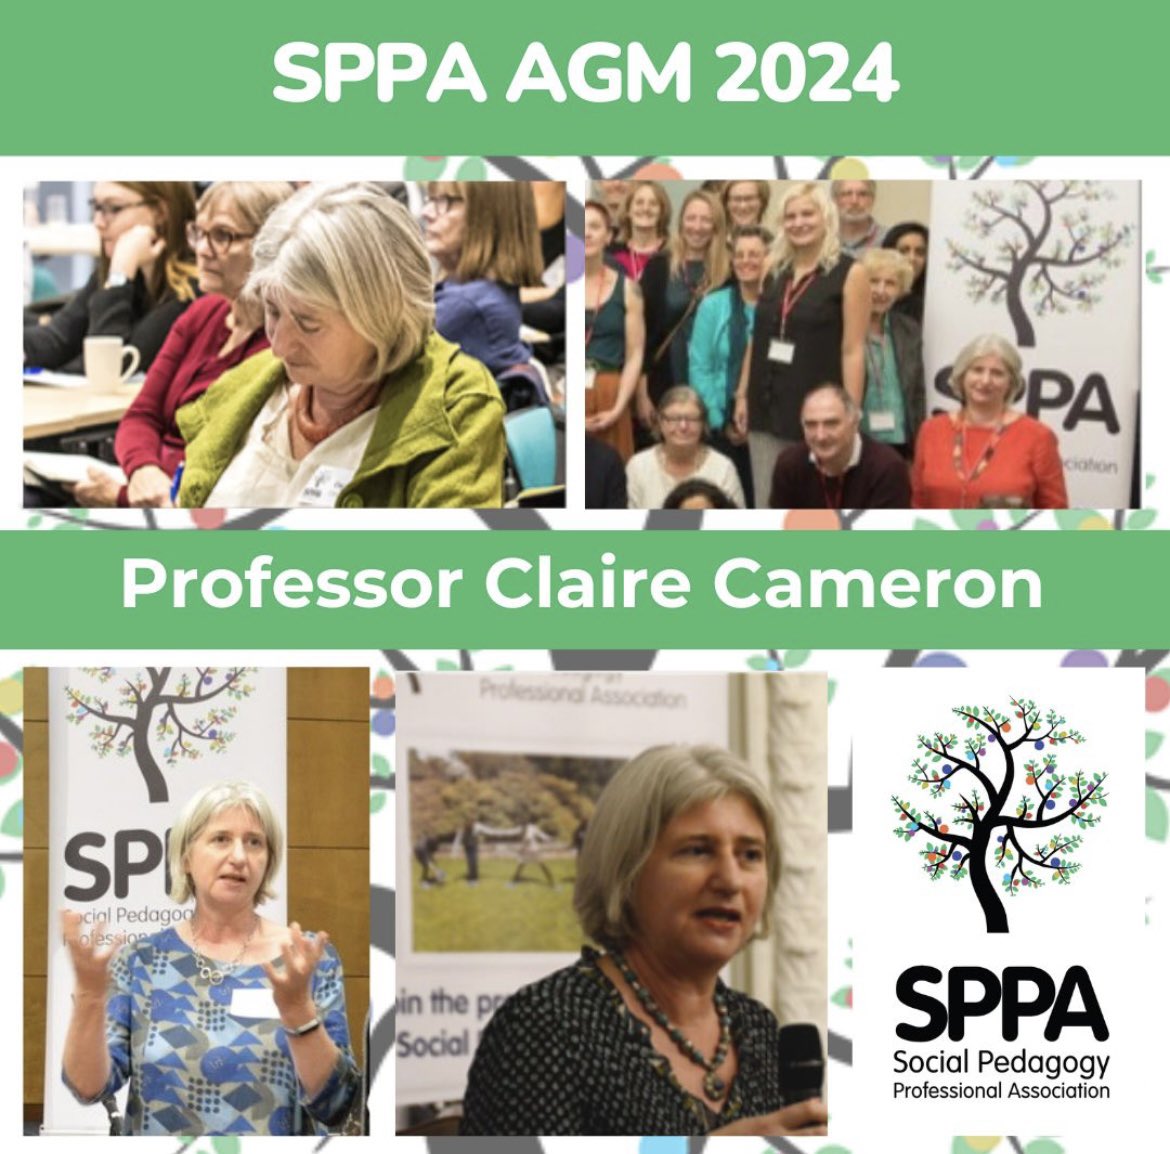 Join us this evening at 6:30 pm for our AGM. Our patron Claire Cameron will be there to talk about social pedagogy in action! We're looking forward to seeing you!
Here's the link to join: lnkd.in/ejUuM75c
#socialpedagogy #pedagogiasocial #spcommunityofpractice #agm2024